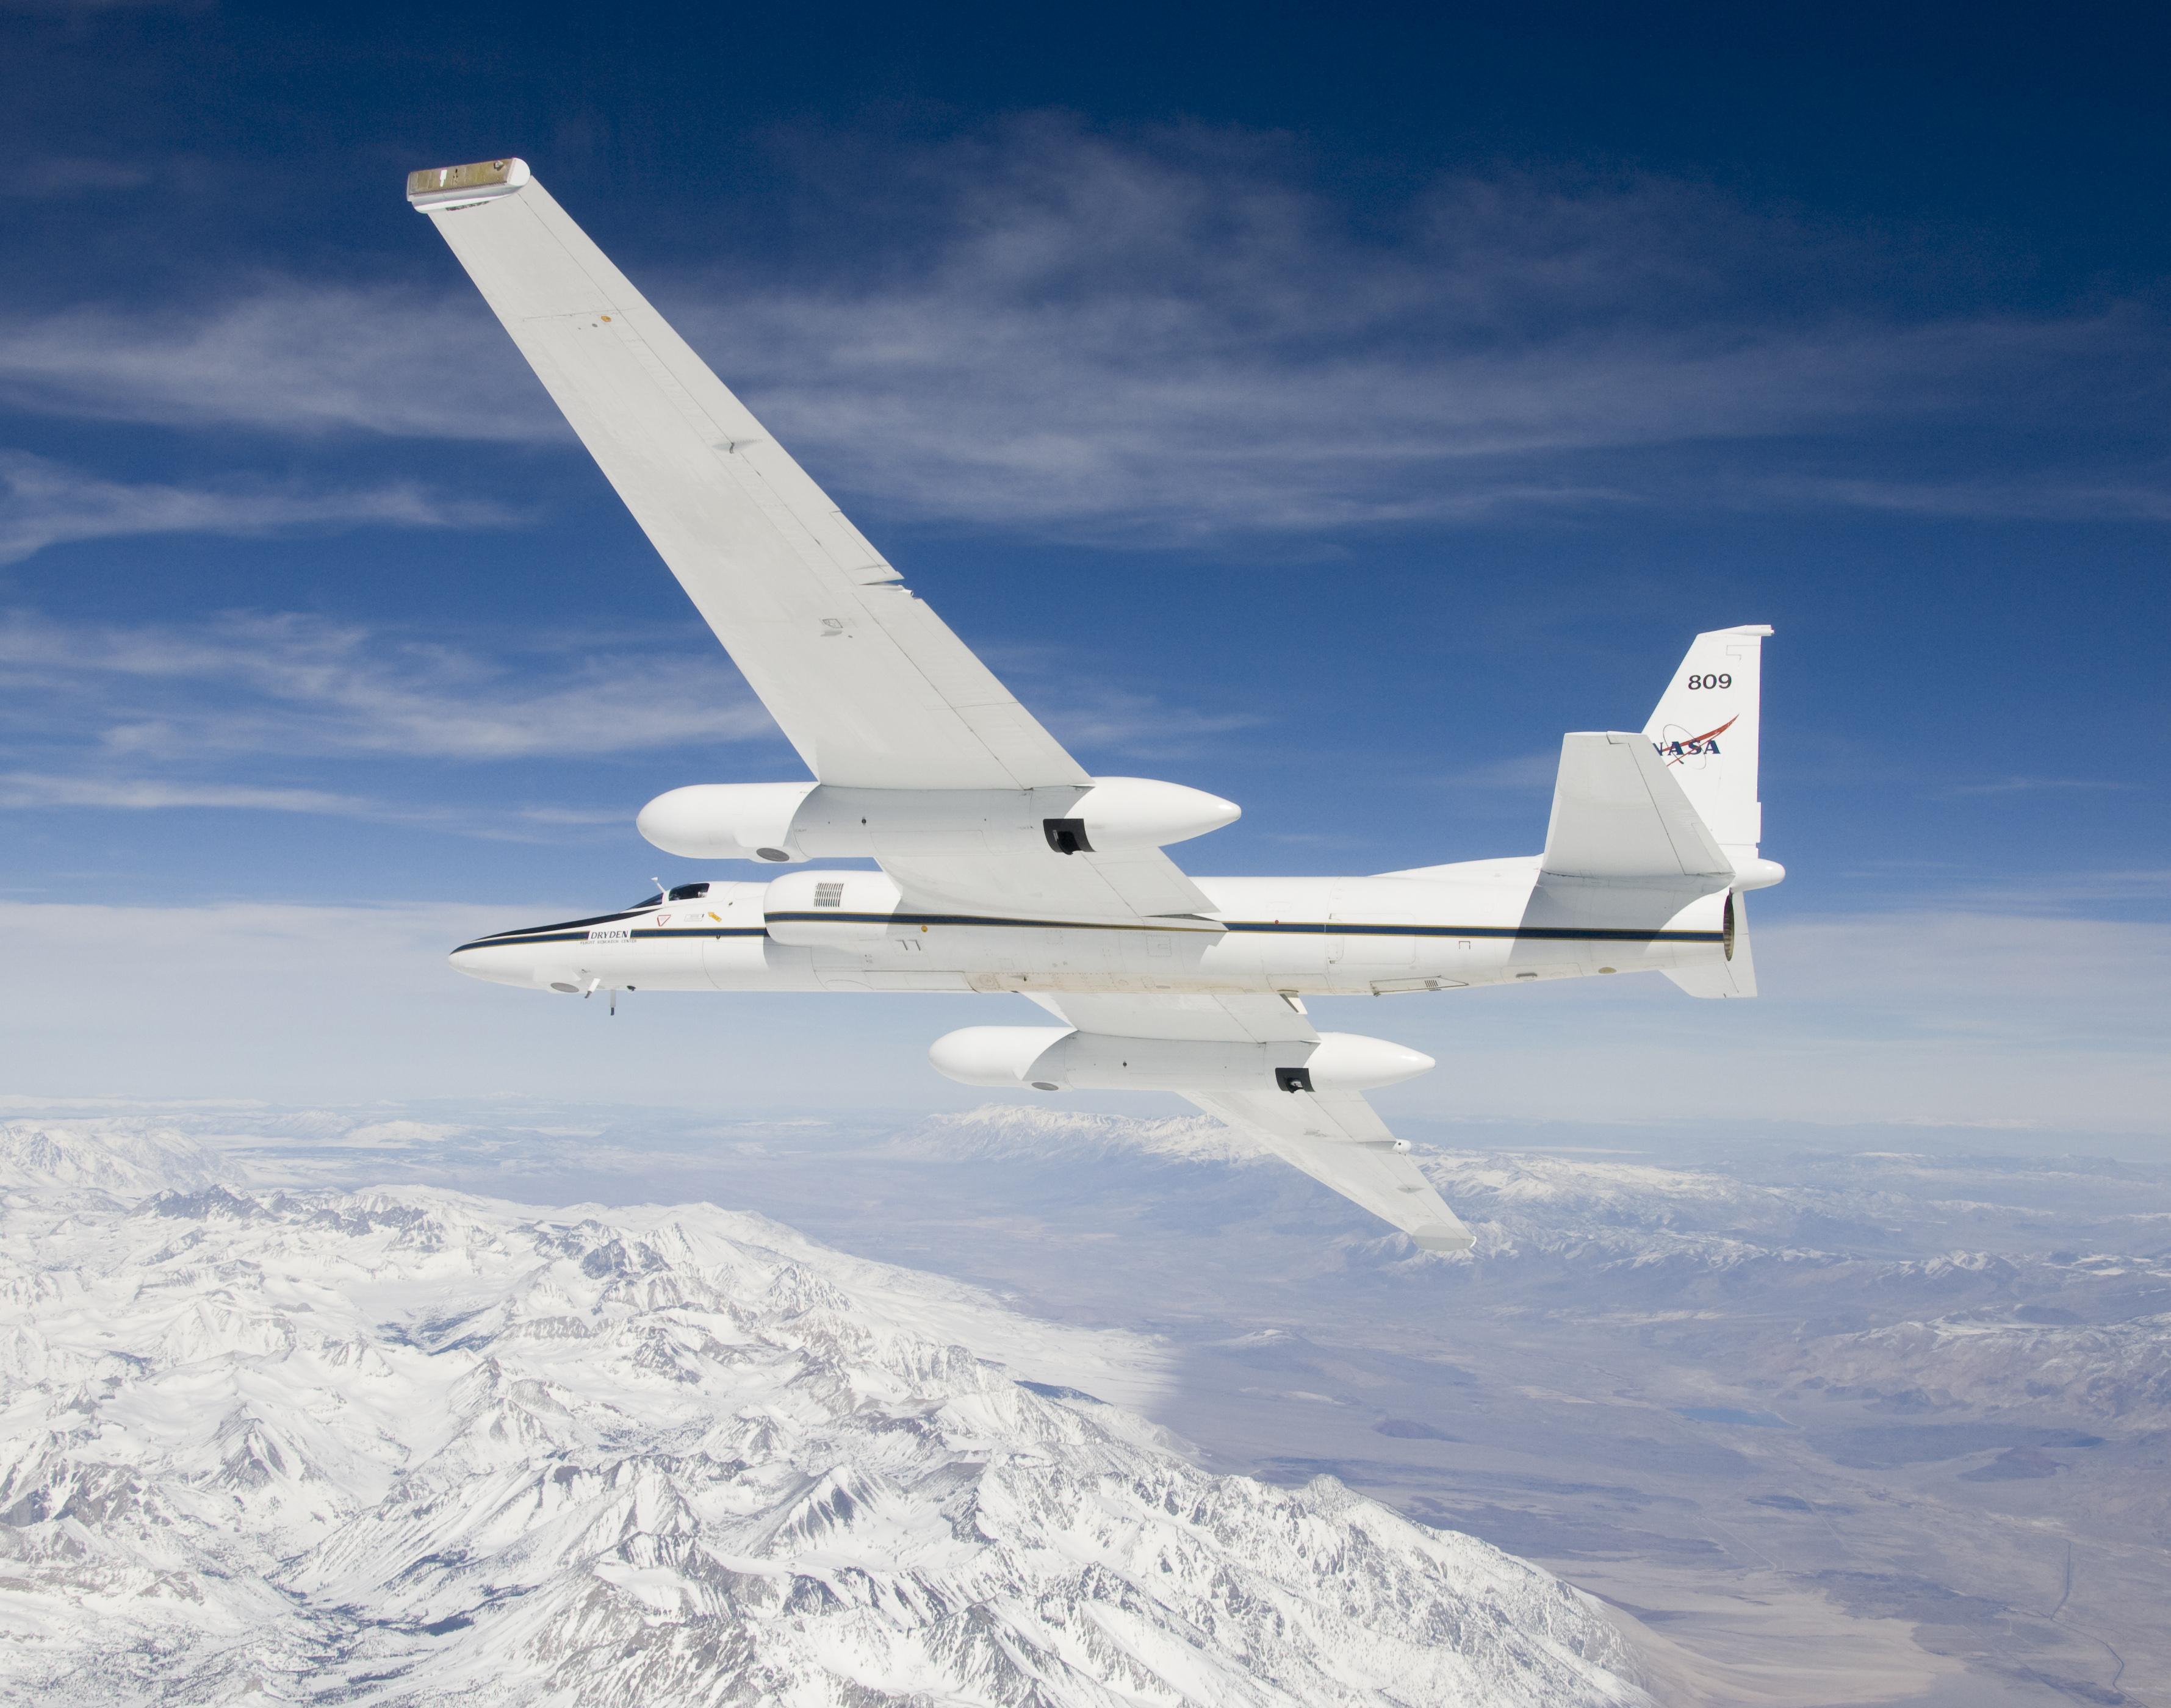 ER-2 high-altitude Earth science aircraft in flight